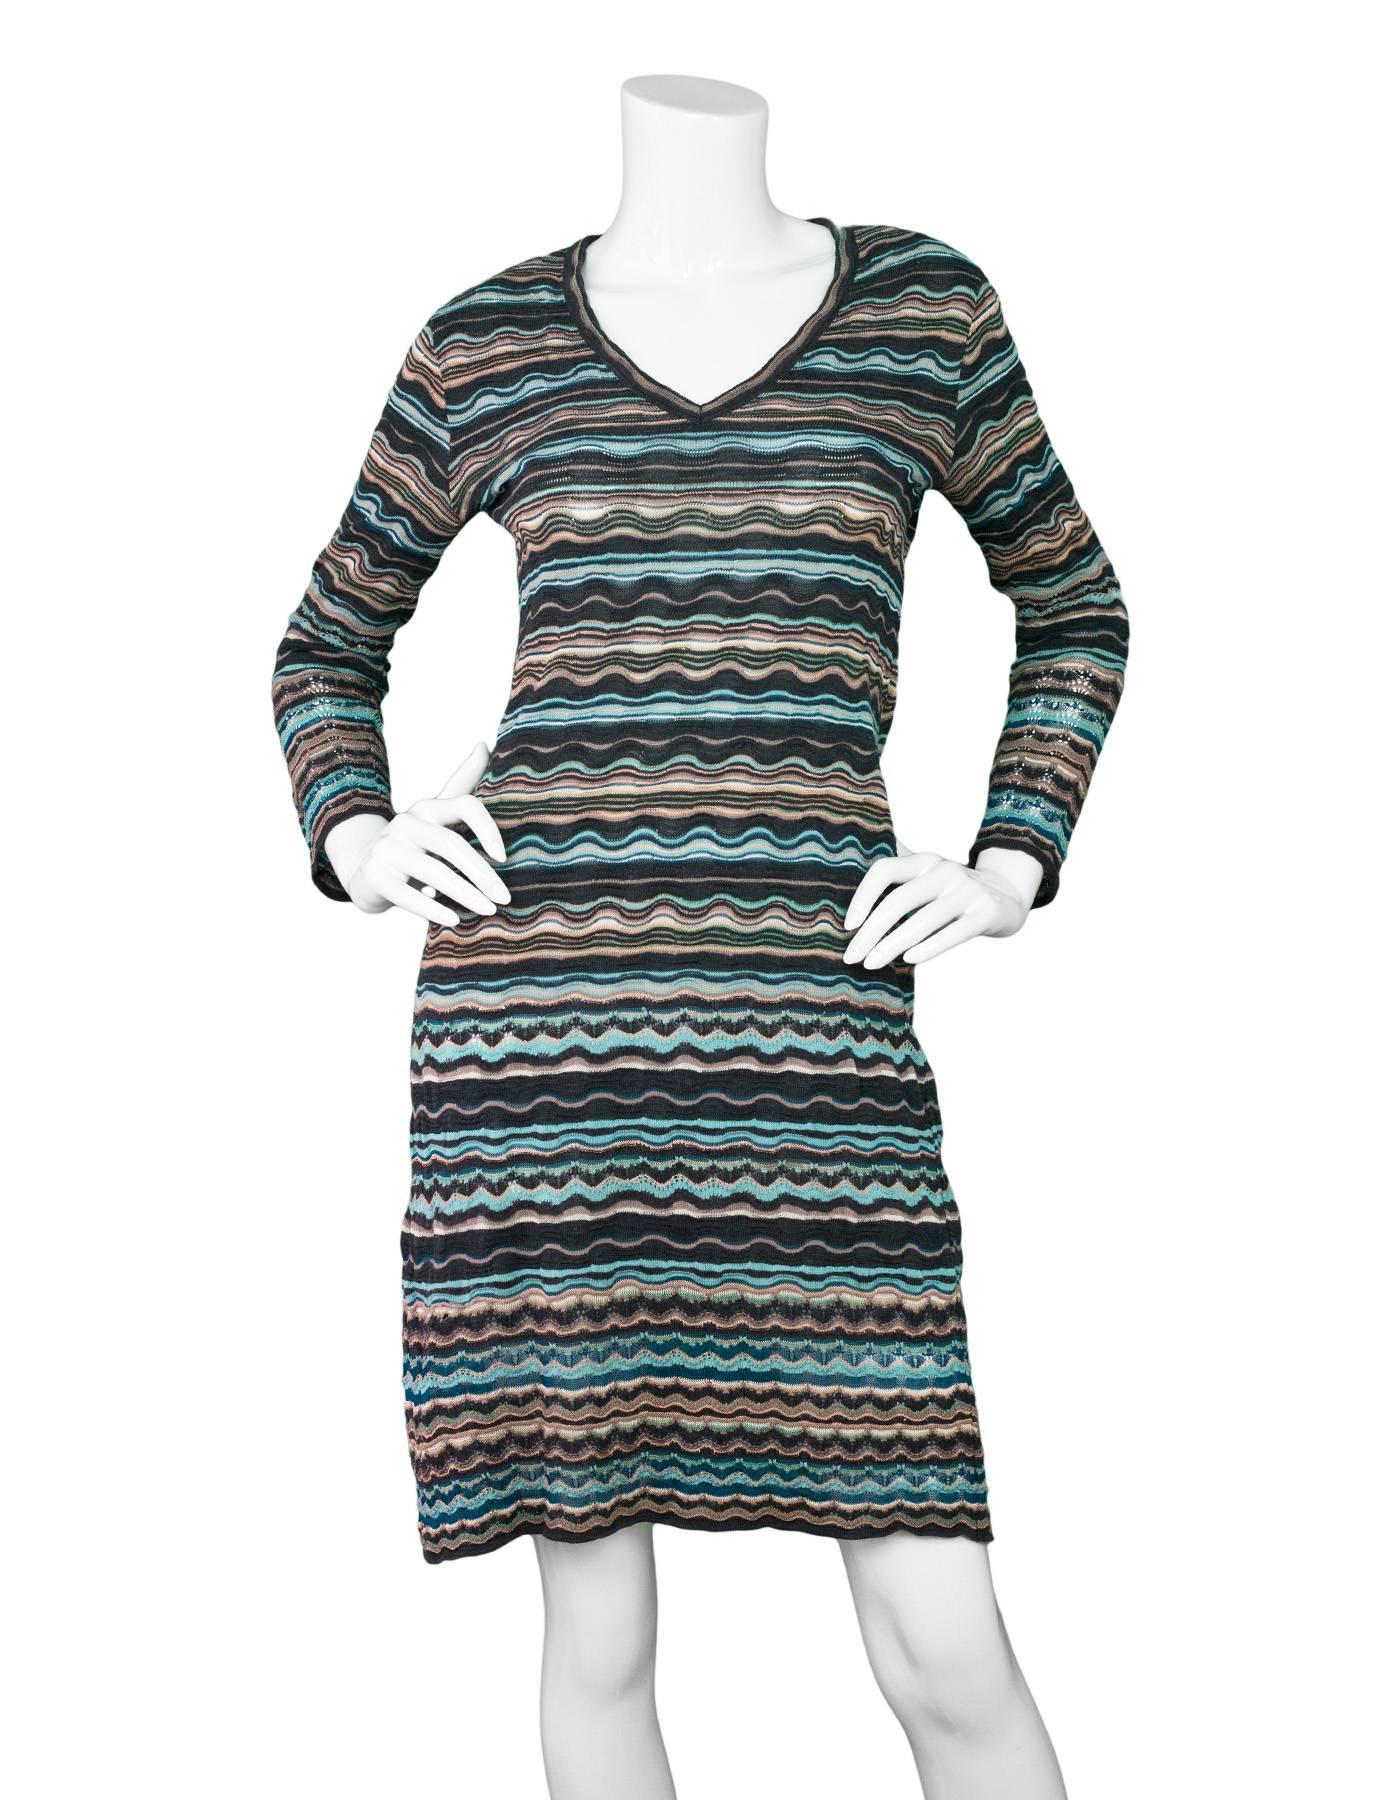 M Missoni Blue & Grey Knit Long Sleeve Dress

Made In: Italy
Color: Blue, grey, peach
Composition: 67% wool, 33% viscose
Lining: 100% polyester
Closure/Opening: Pull over
Exterior Pockets: None
Interior Pockets: None
Overall Condition: Excellent